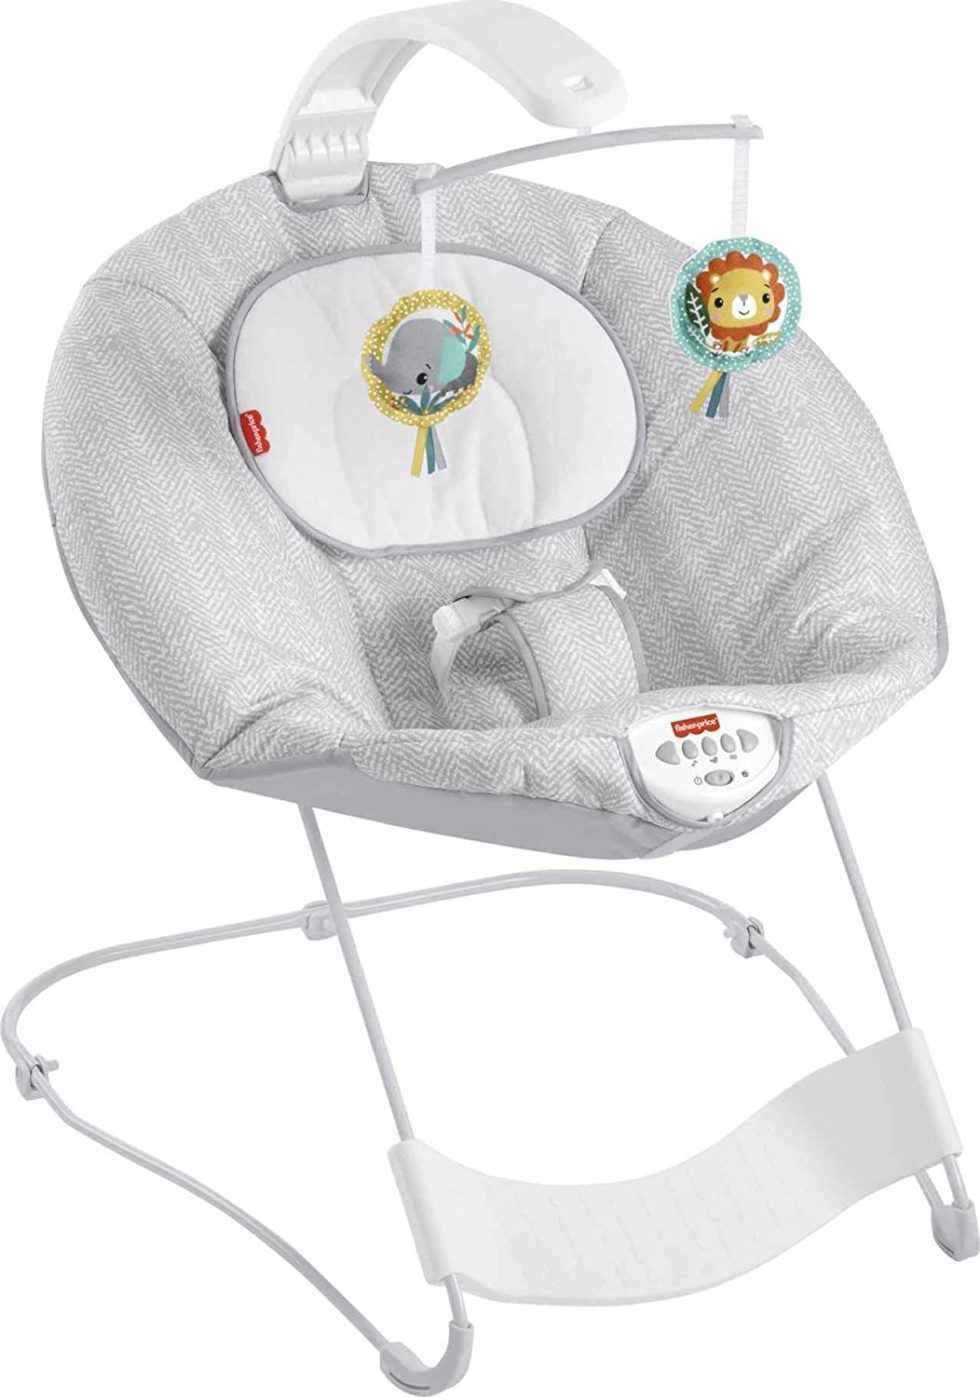 fisher price bouncer seat x7035